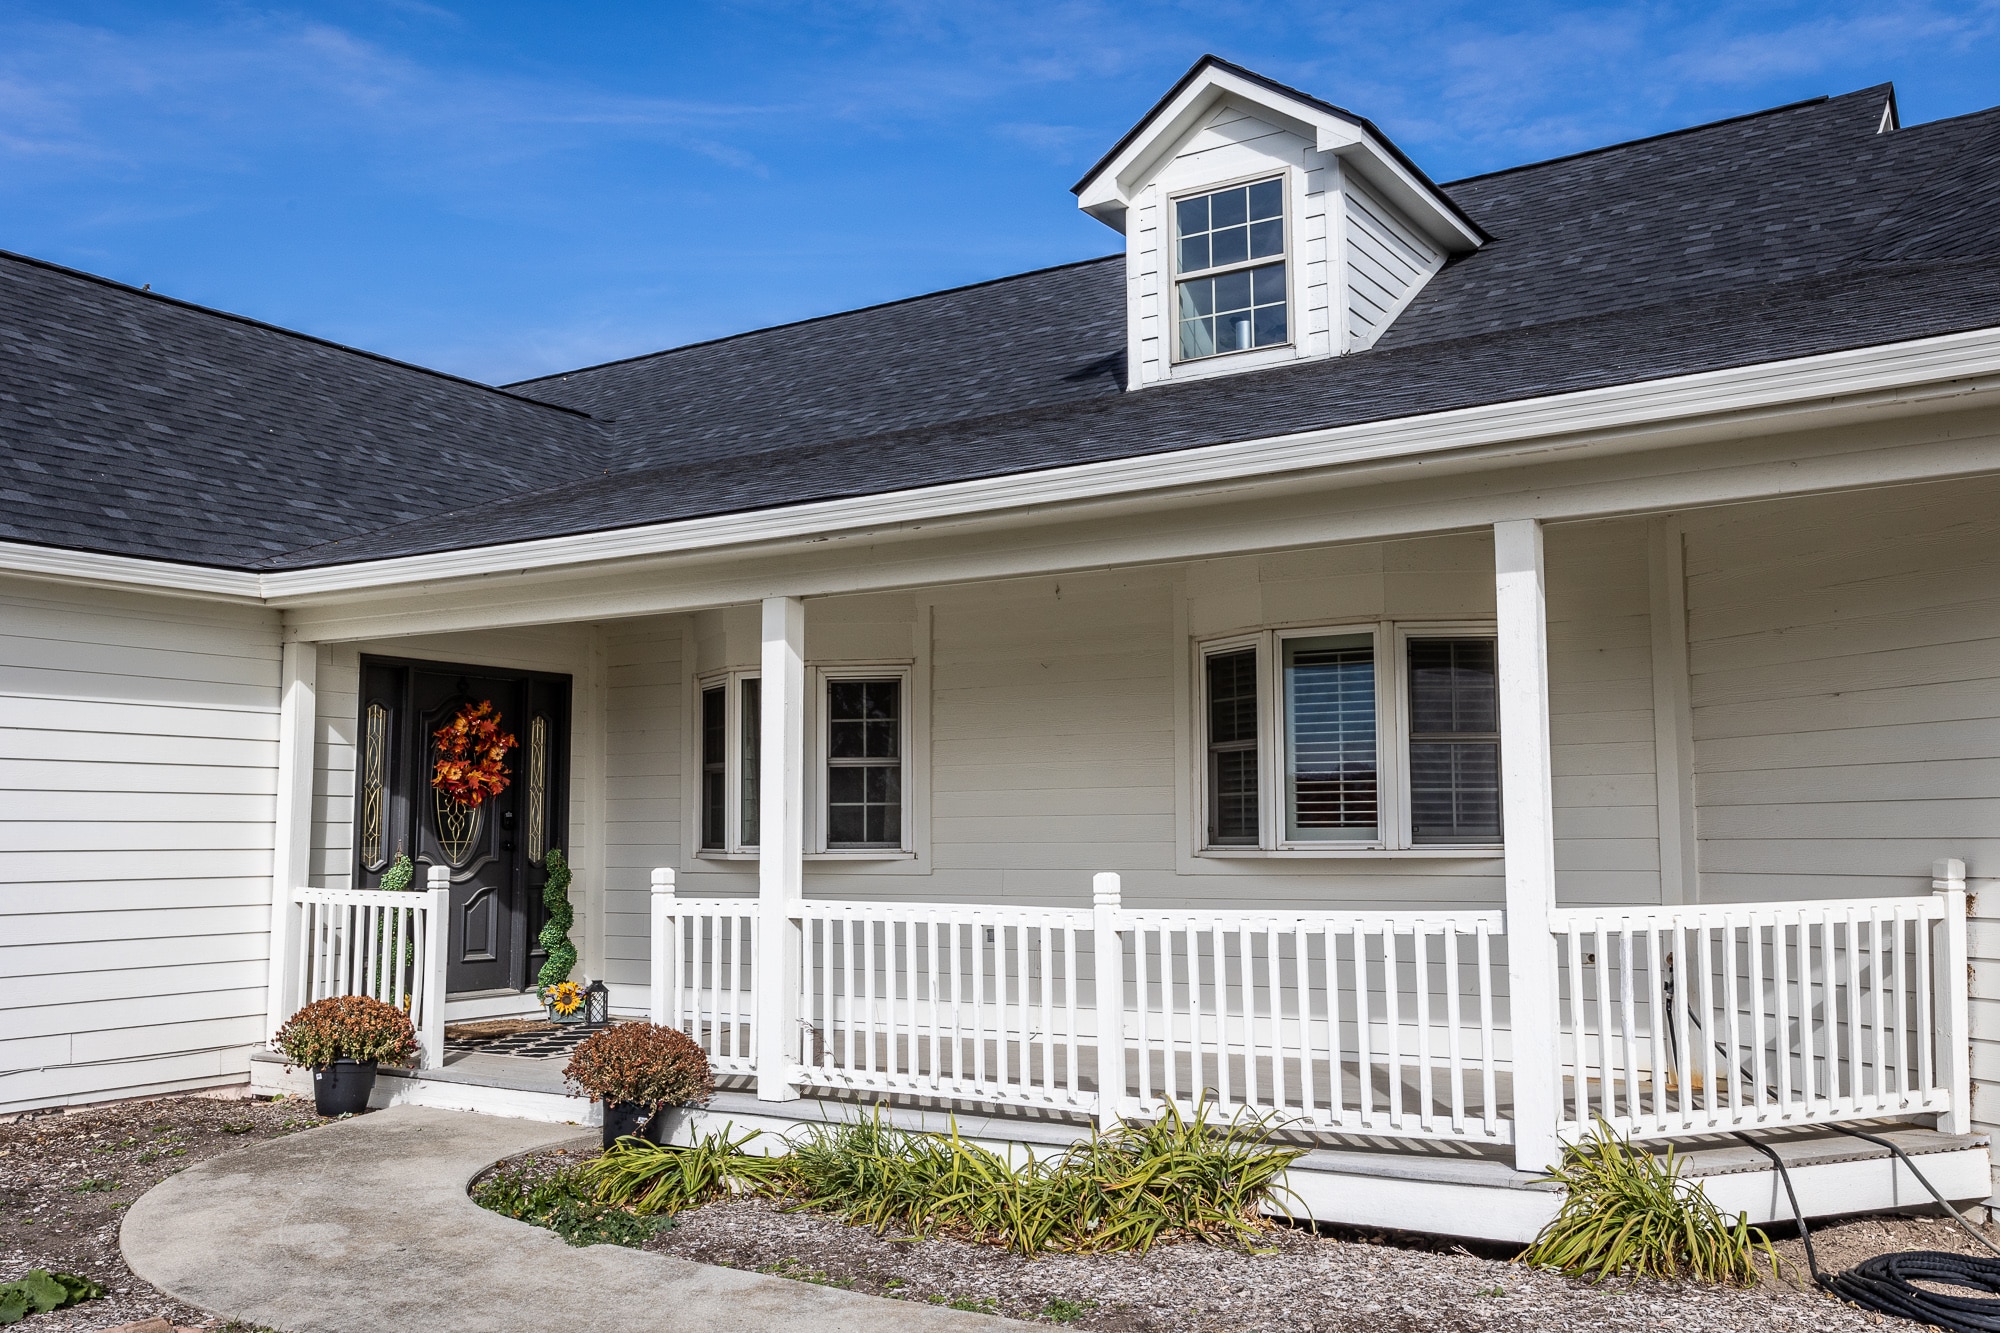 Roofing and Siding Contractors in Franklin